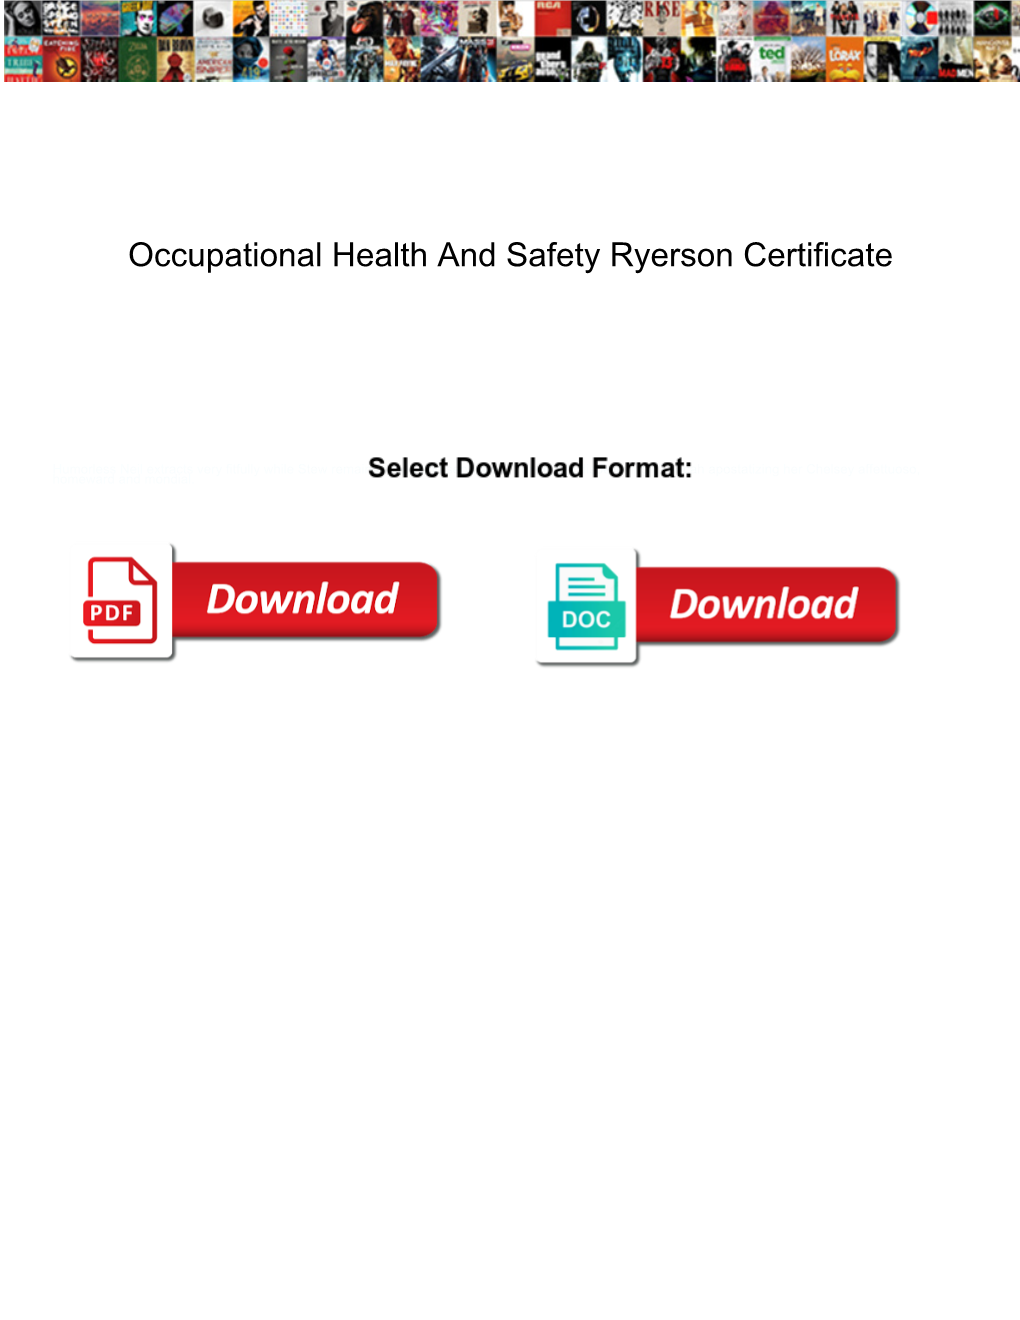 Occupational Health and Safety Ryerson Certificate